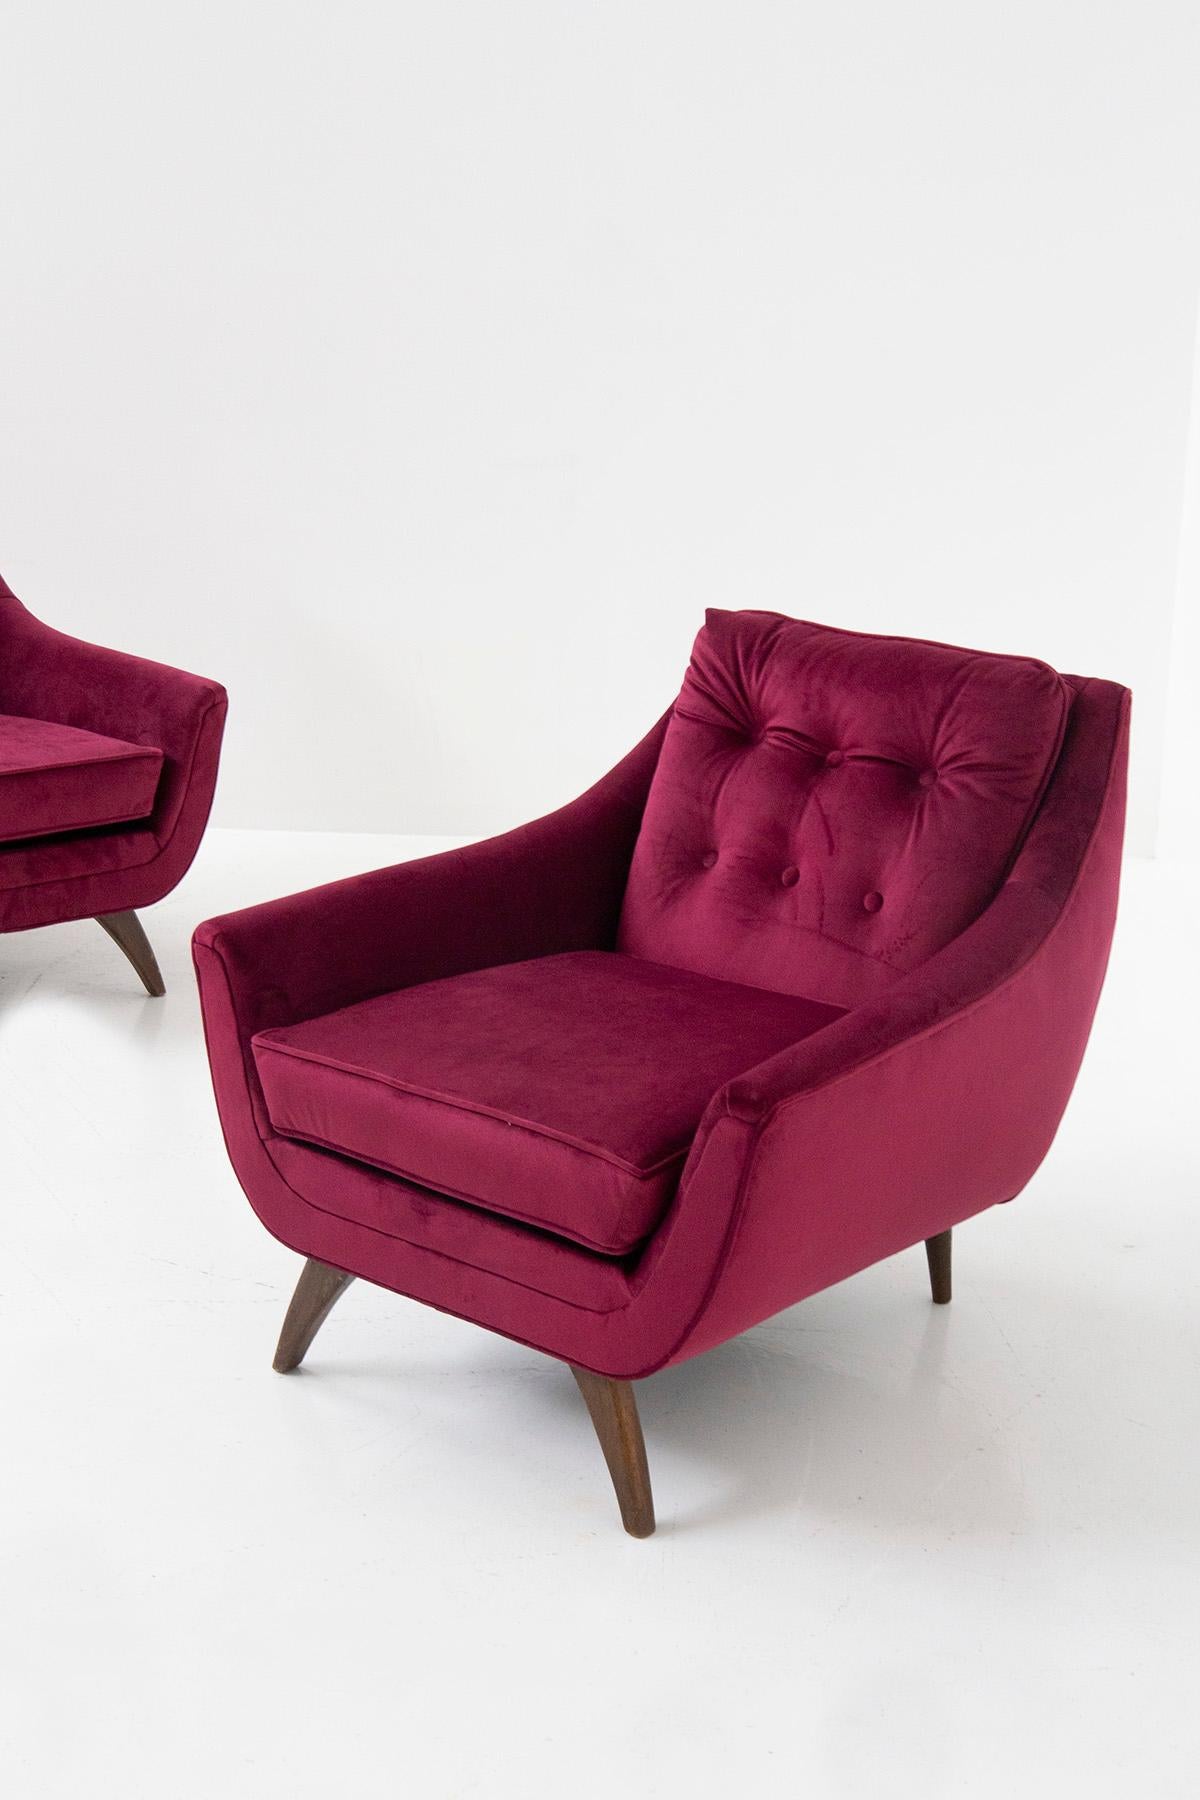 Mid-20th Century Adrian Pearsall Pair of Purple Armchairs in Velvet Him and Her For Sale